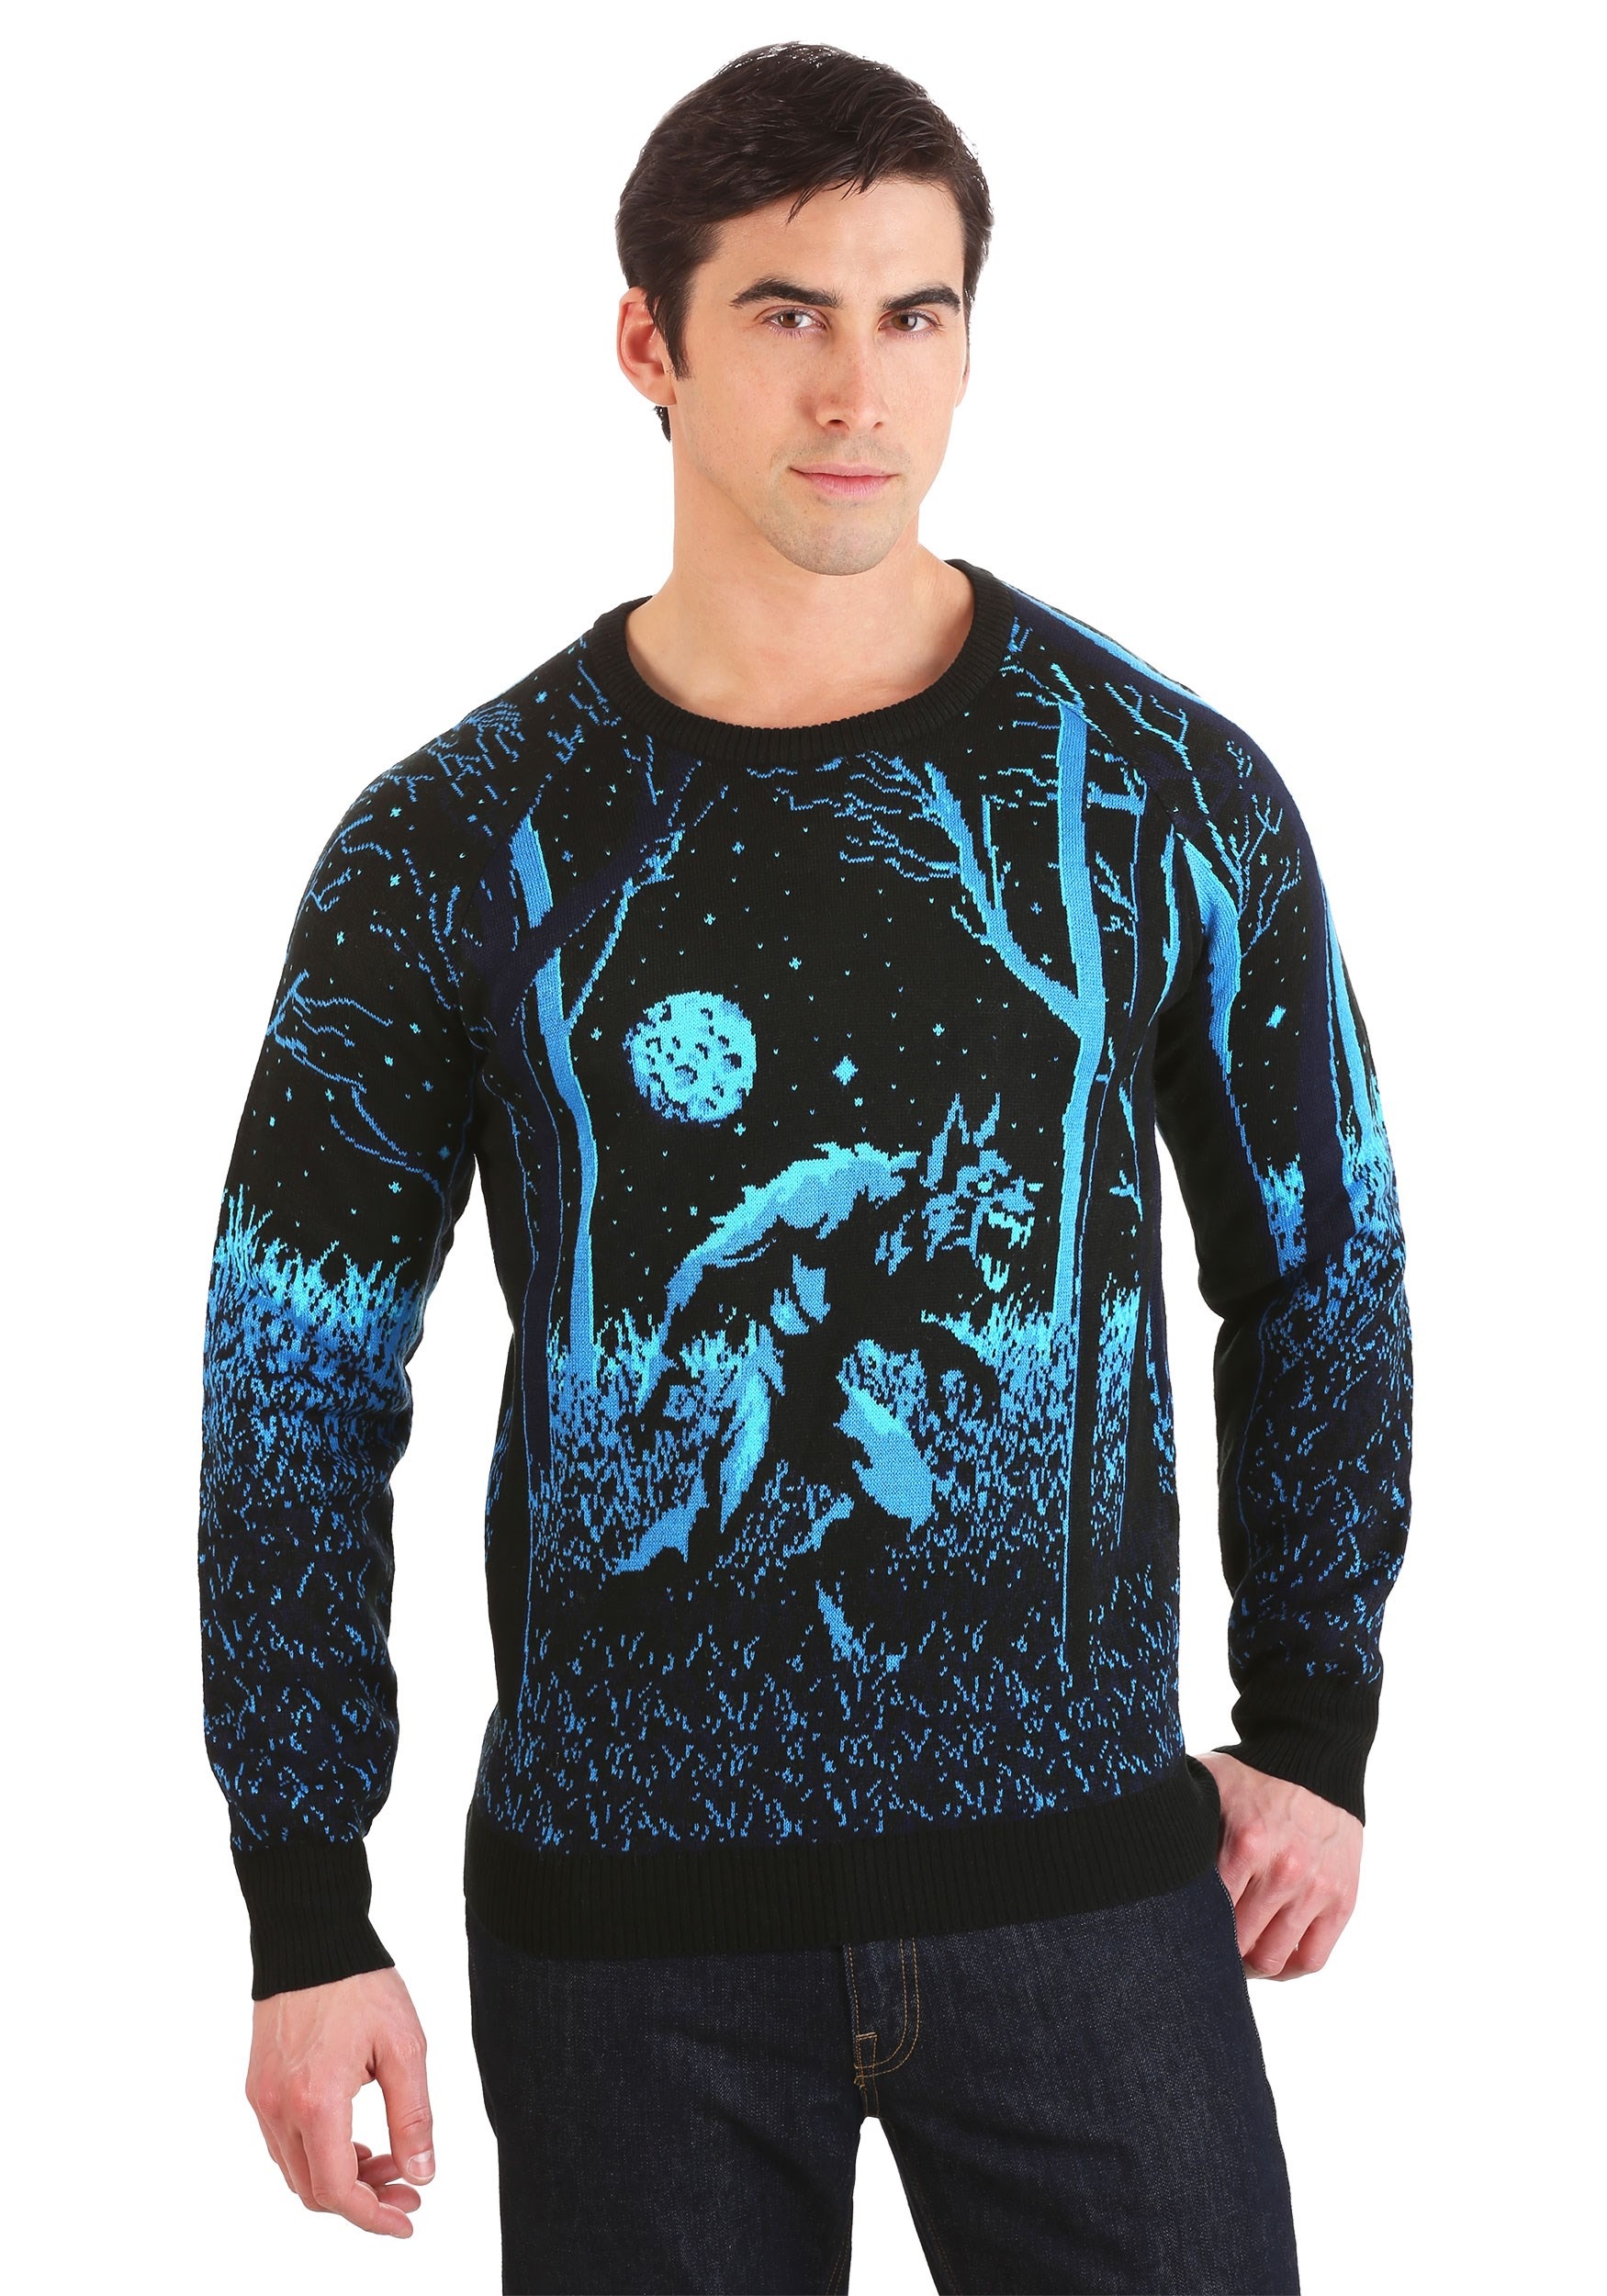 Prowling Werewolf Ugly Halloween Sweater for Adults